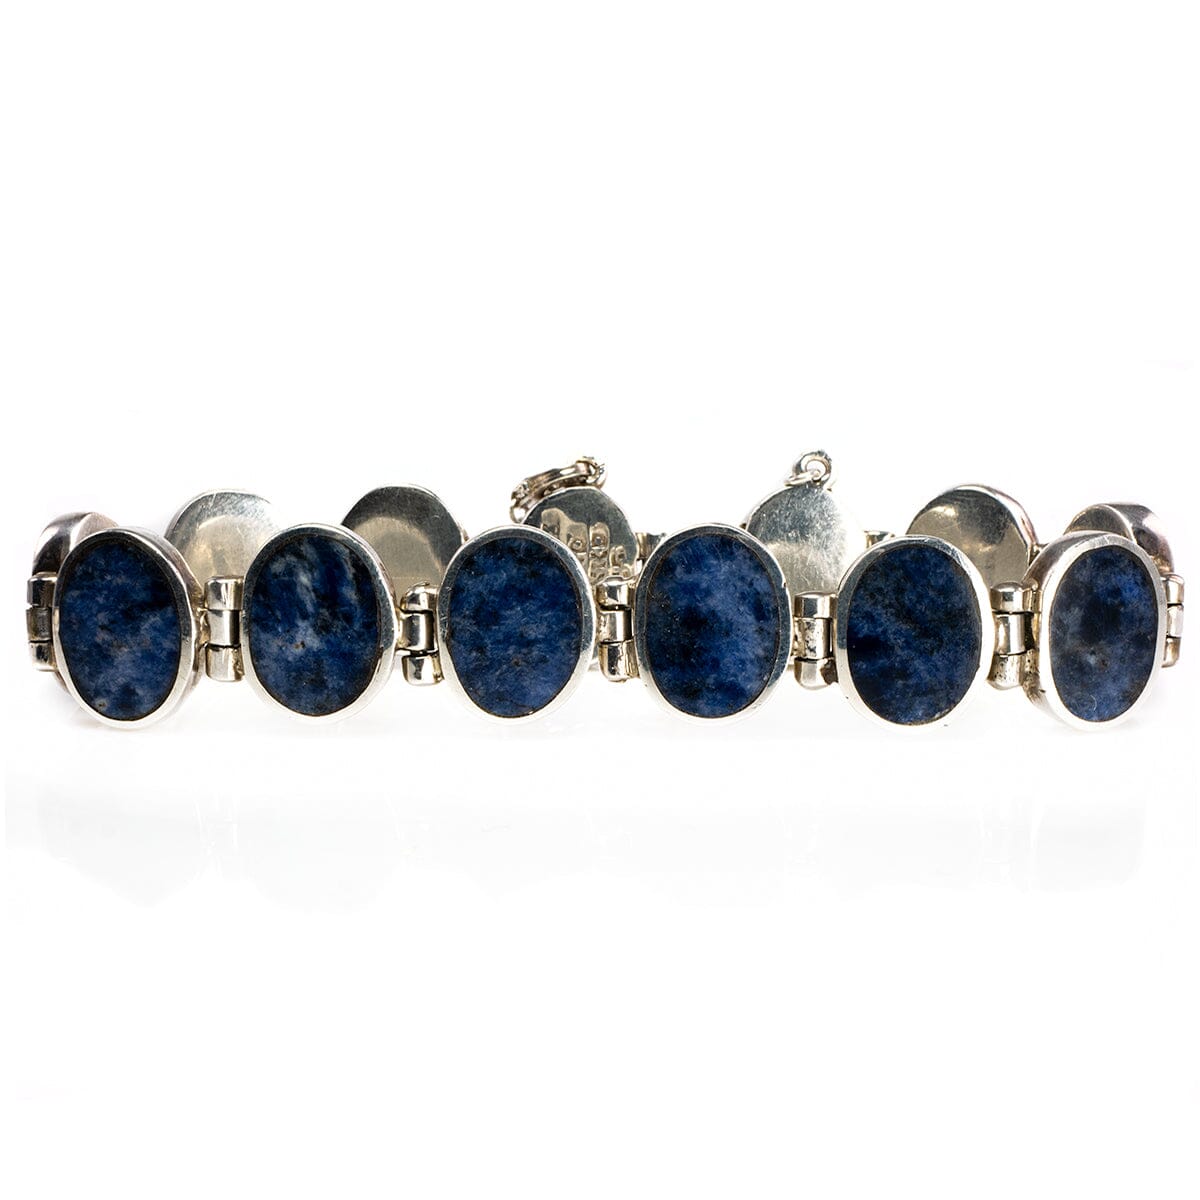 Great Lakes Boutique Silver and Sodalite Bracelet